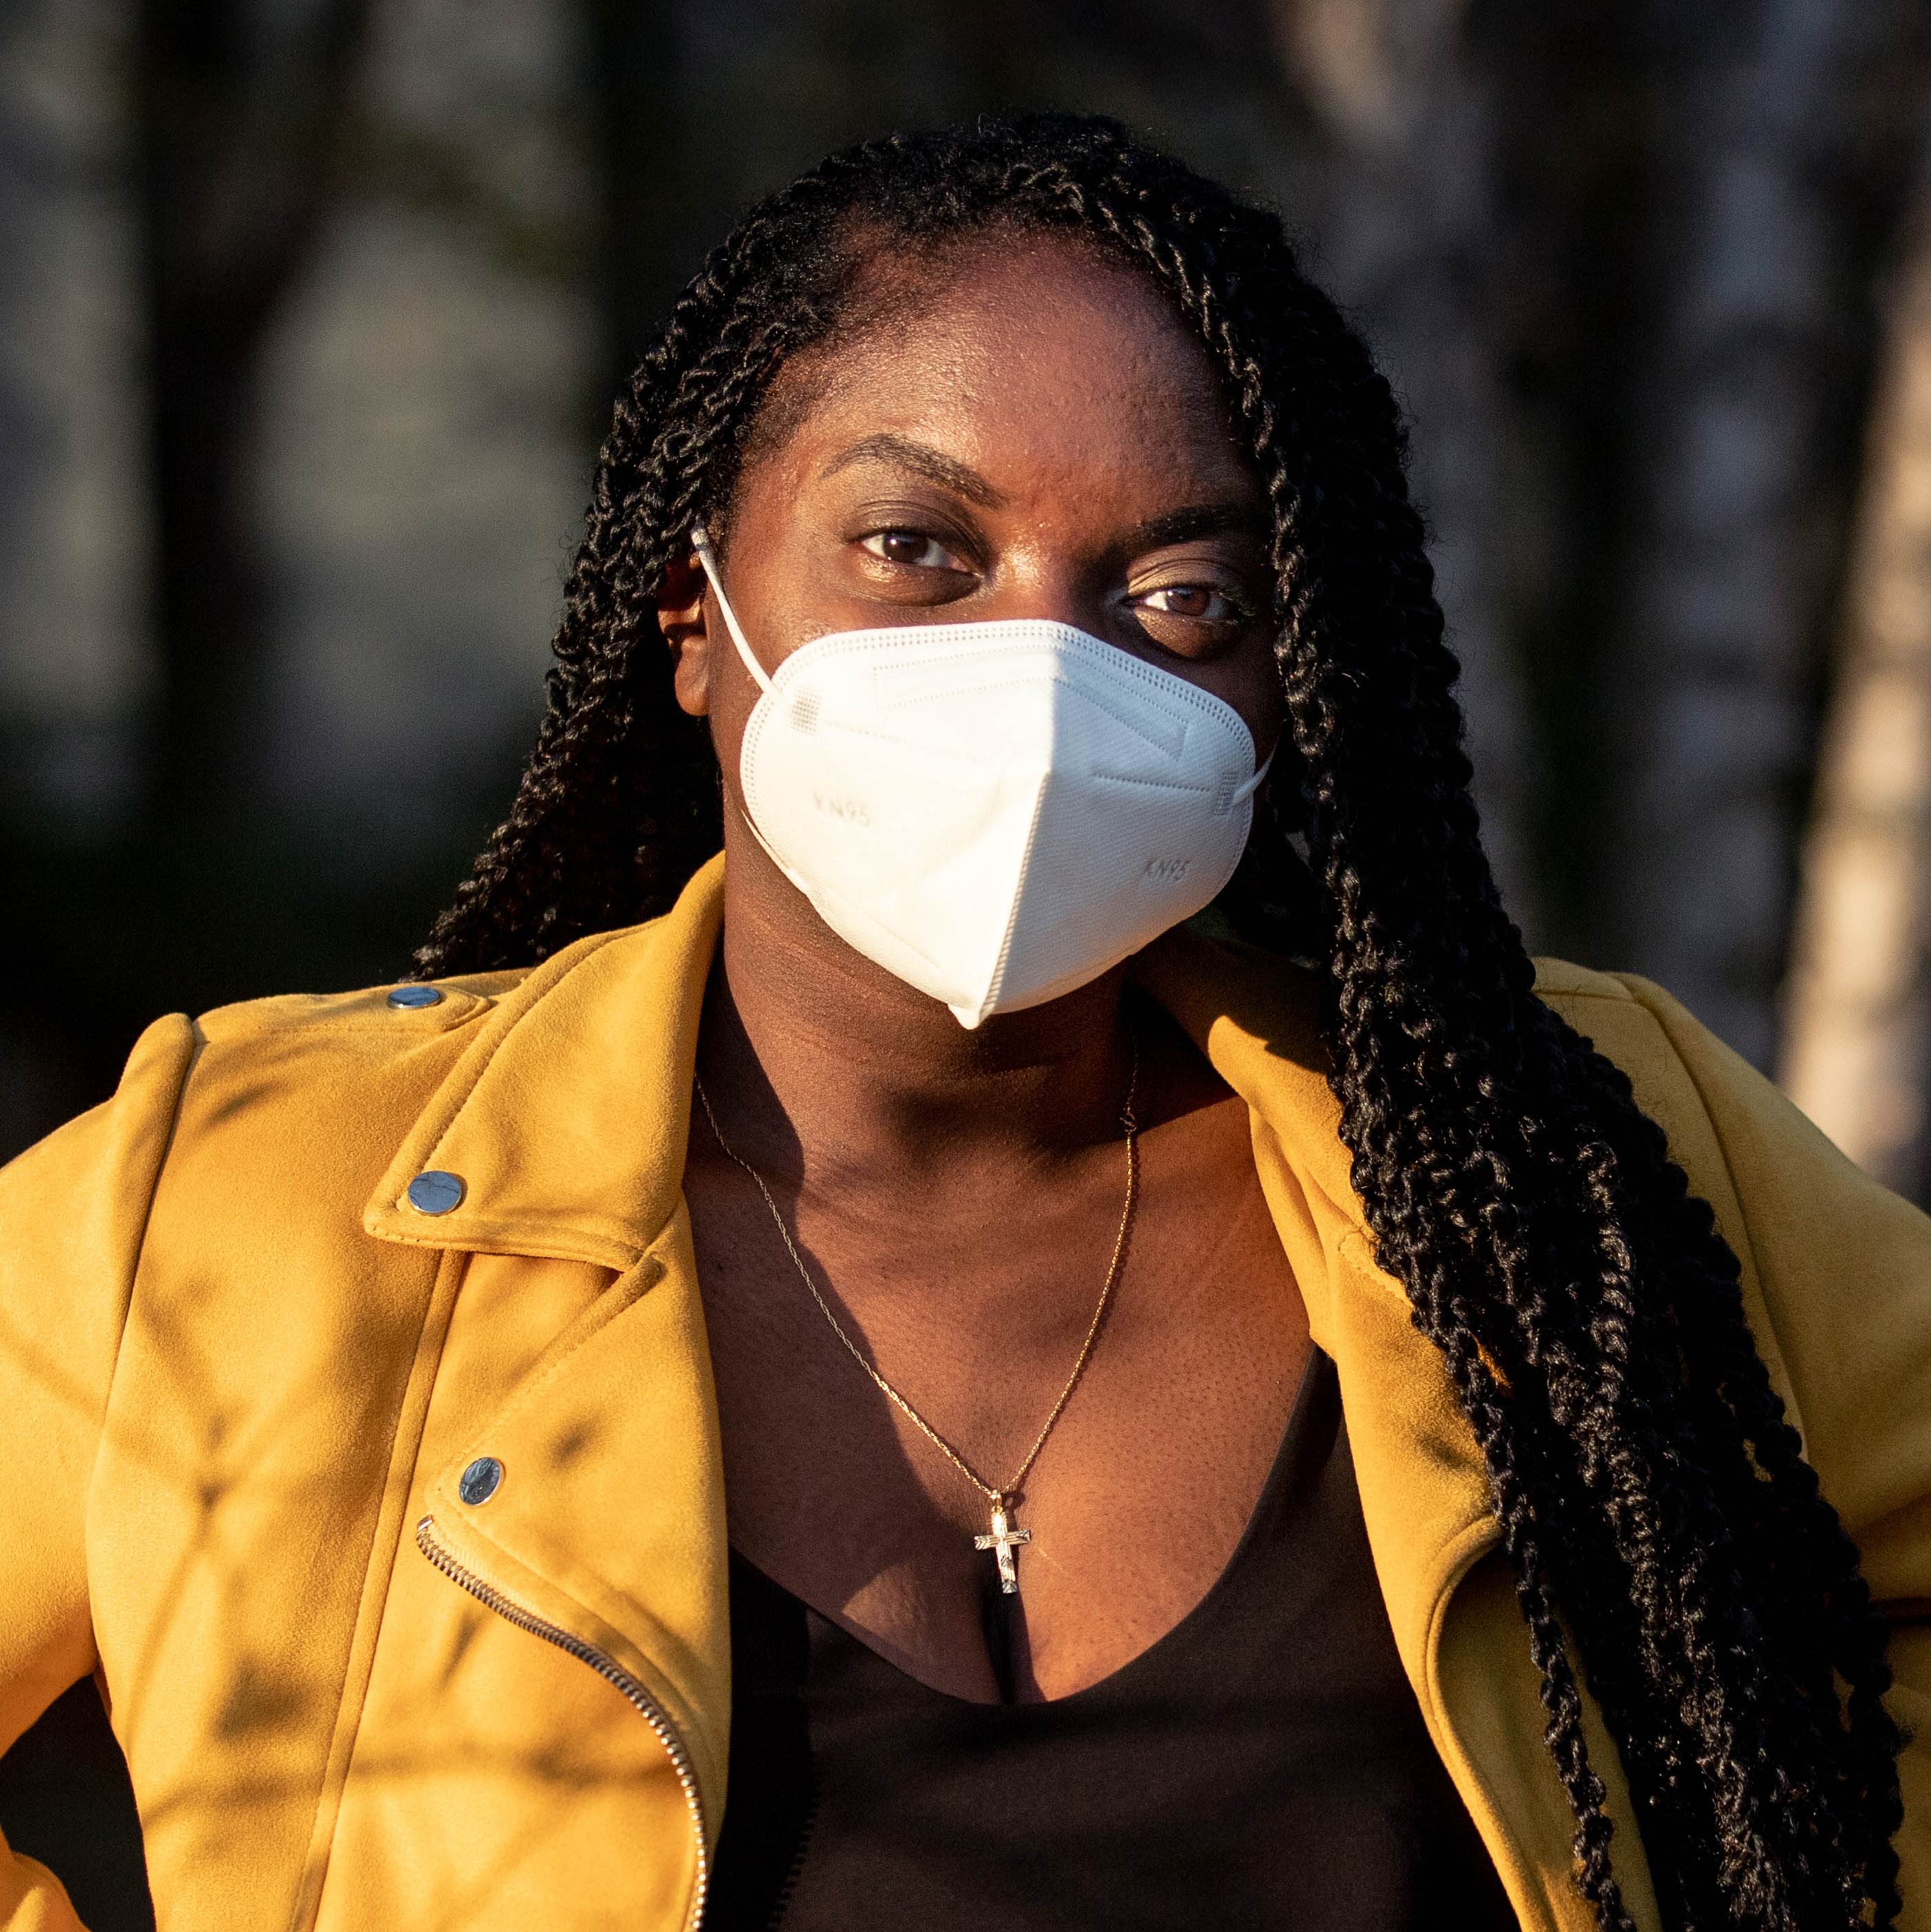 A young Black woman in a mask looking at the camera, wearing a dramatic yellow jacket.